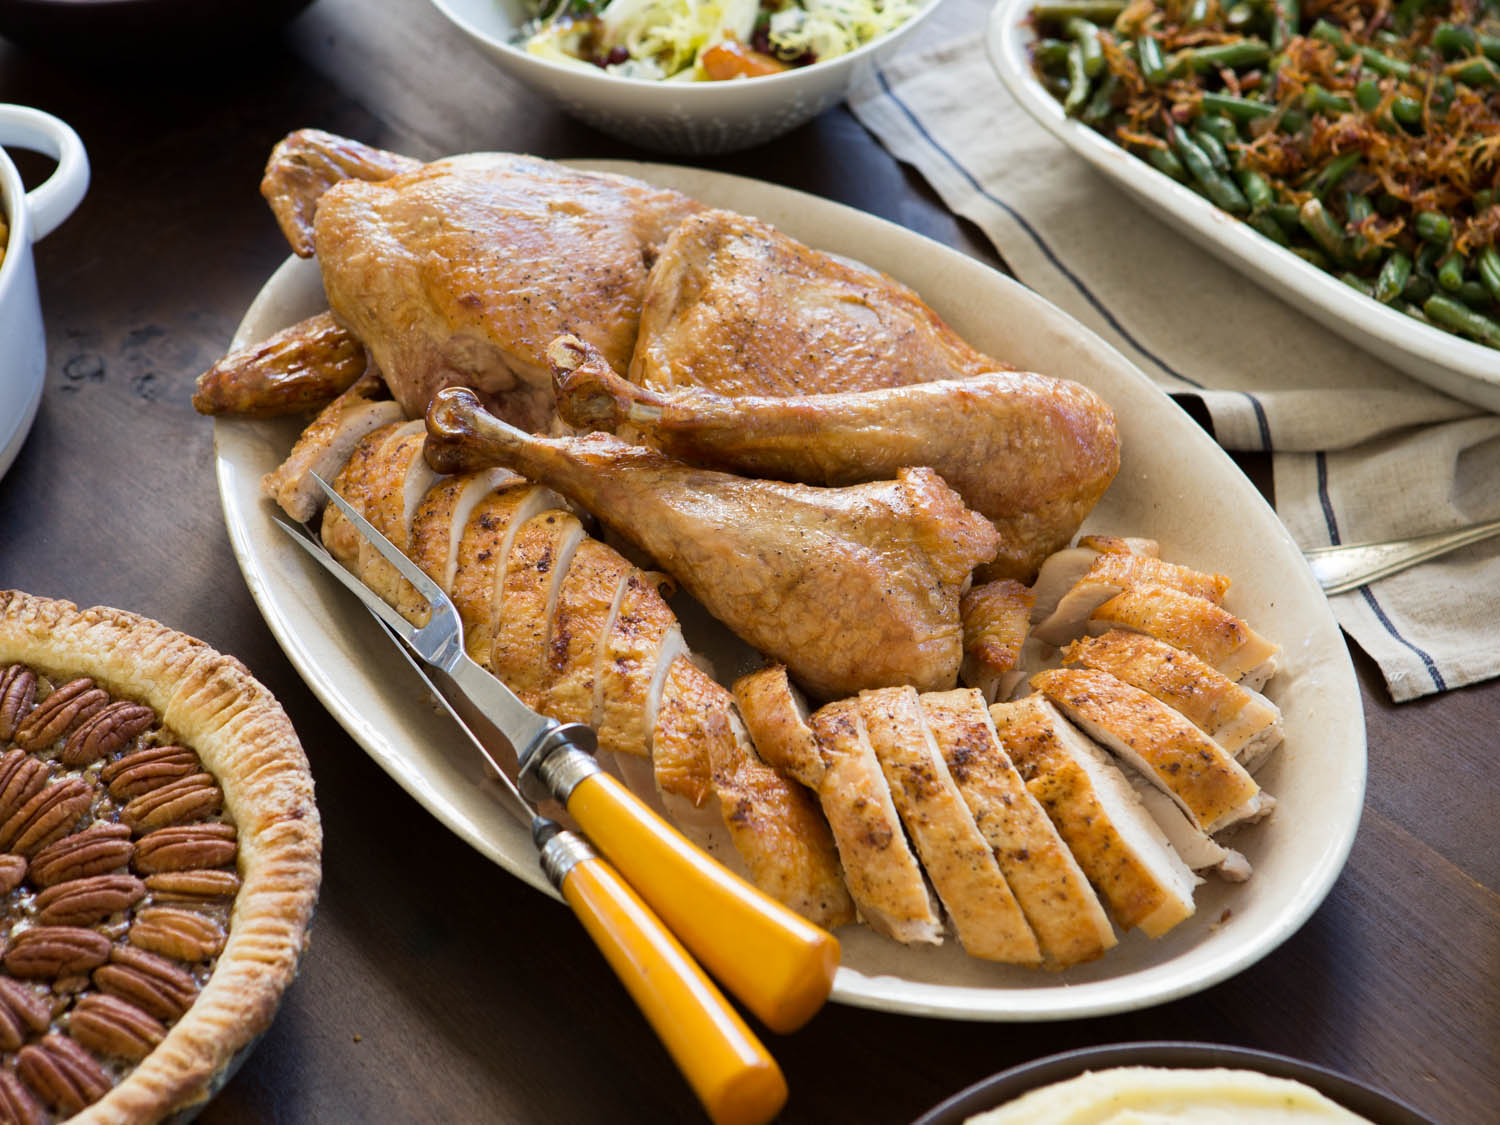 A platter of carved turkey with a carving knife and fork, surrounded by pecan pie, green bean casserole, and salad